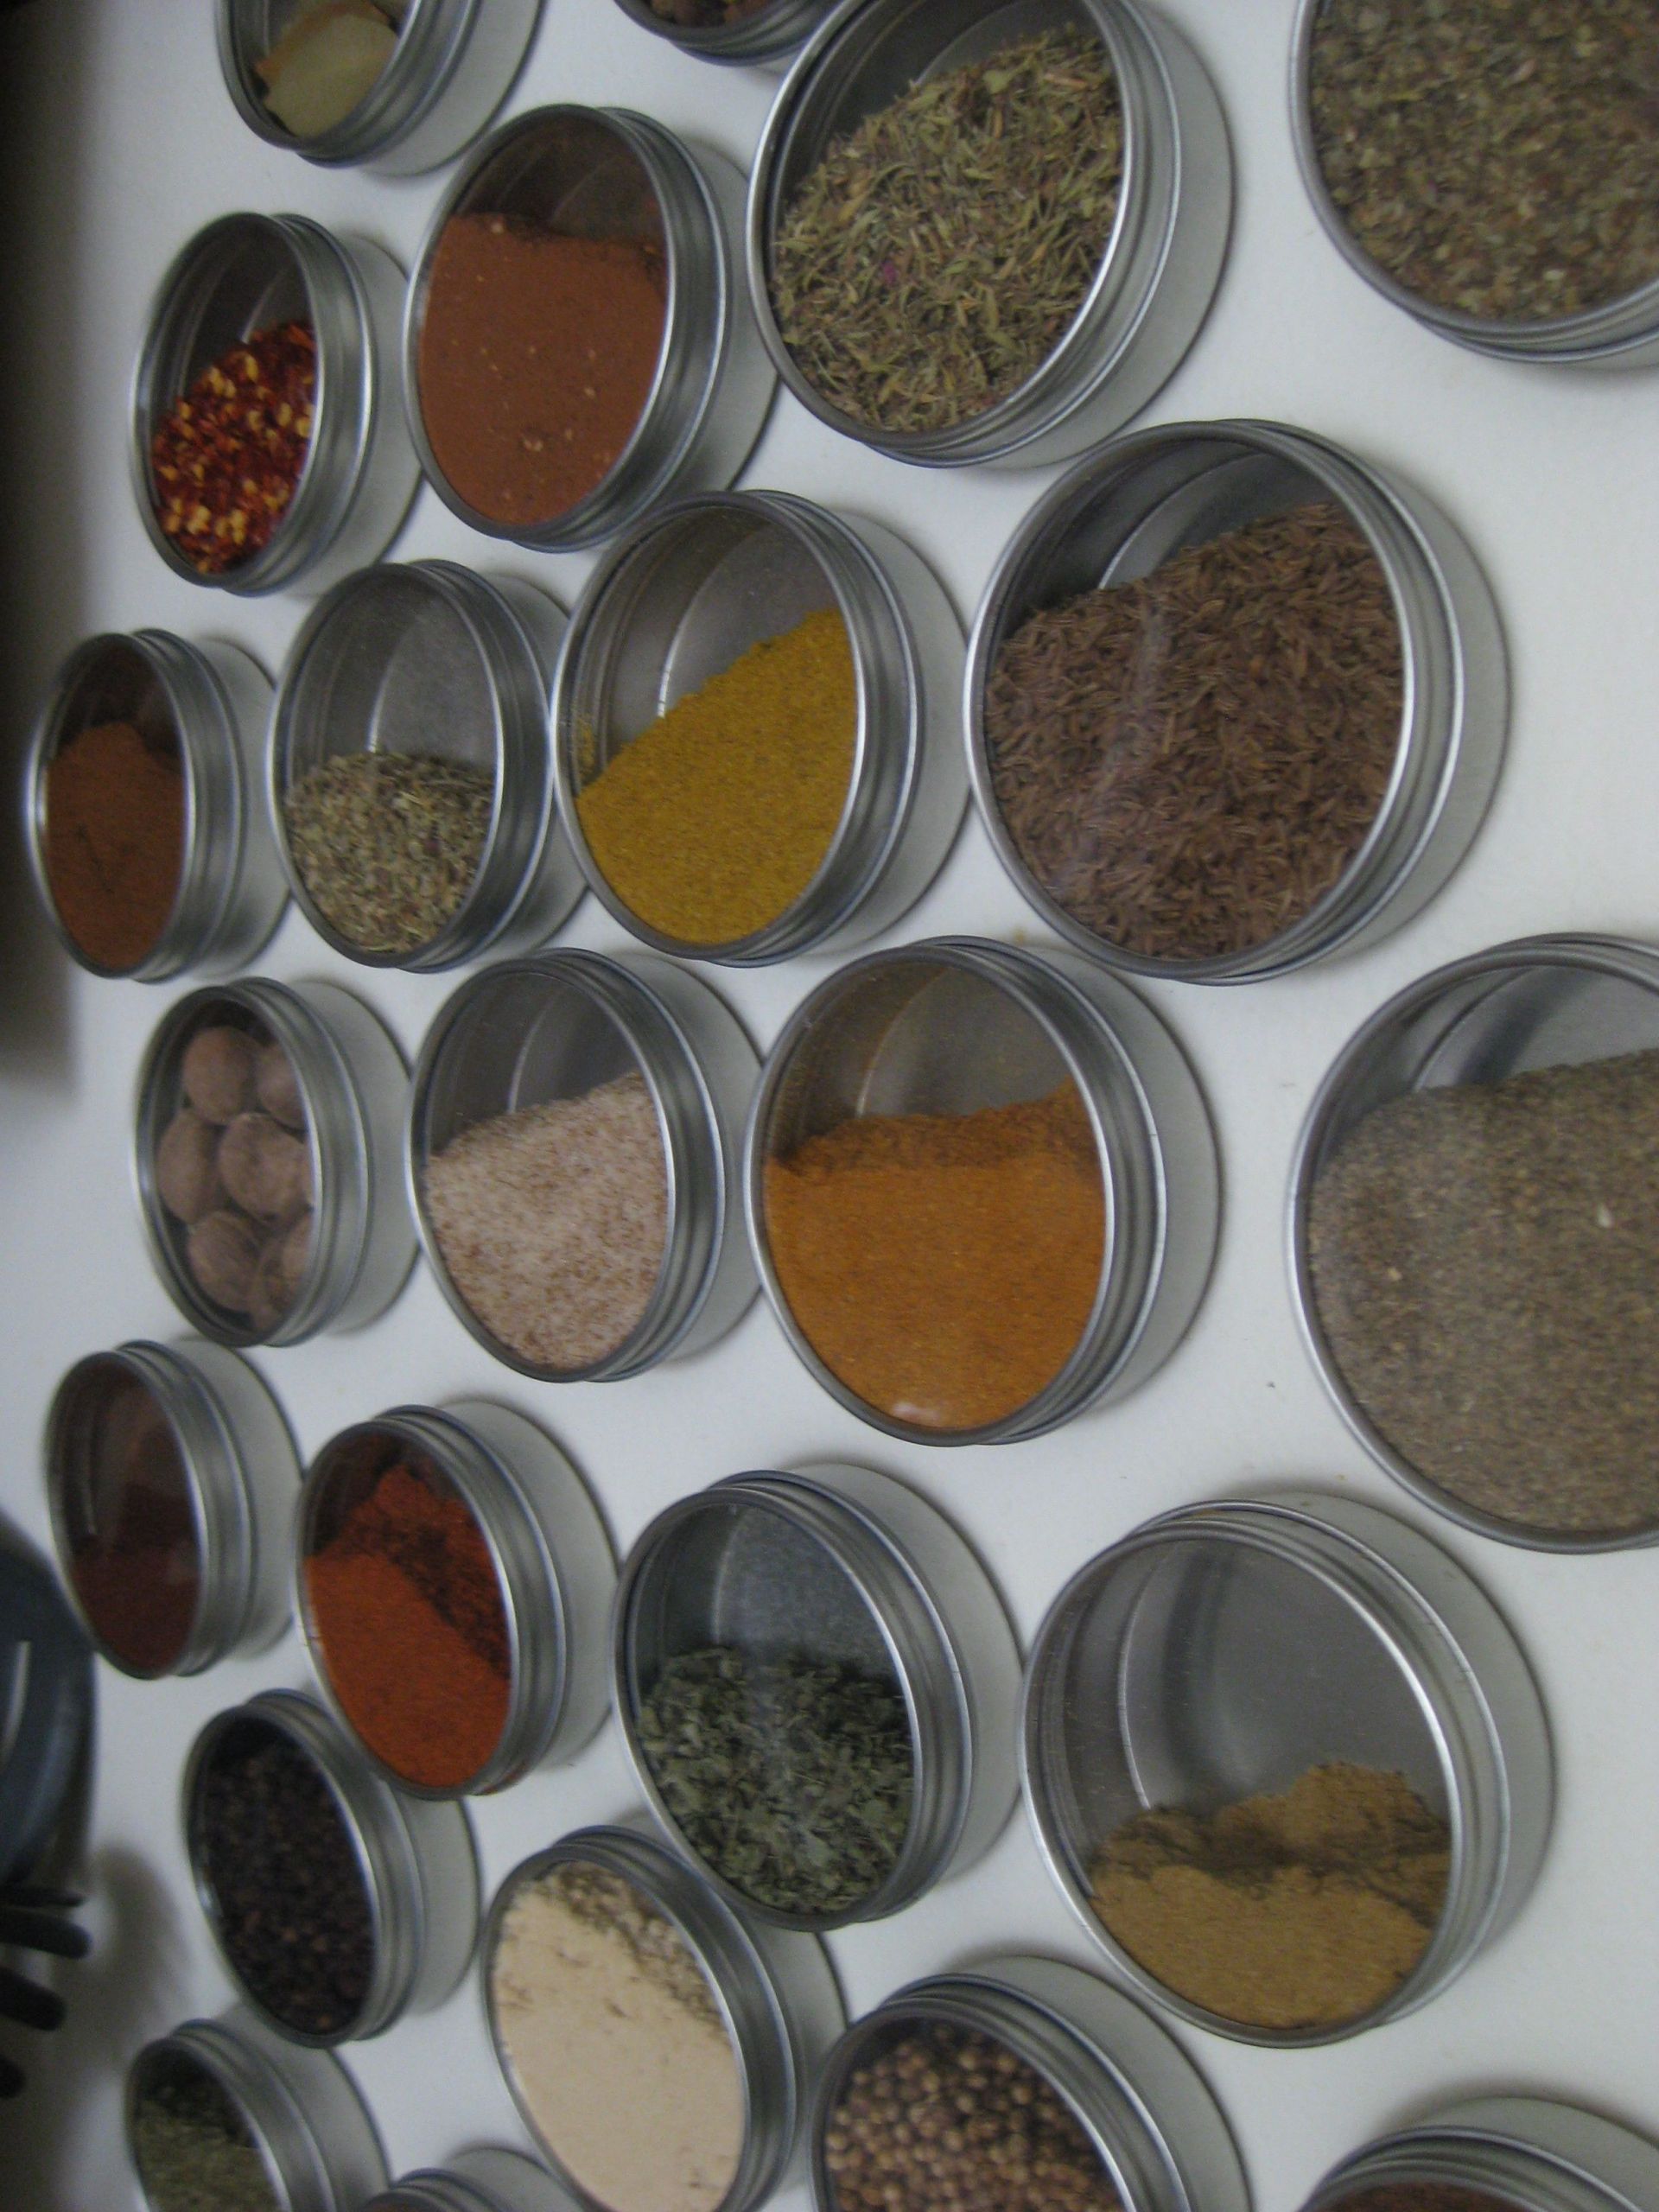 DIY Magnetic Spice Rack
 Make Your Own Magnetic Spice Rack